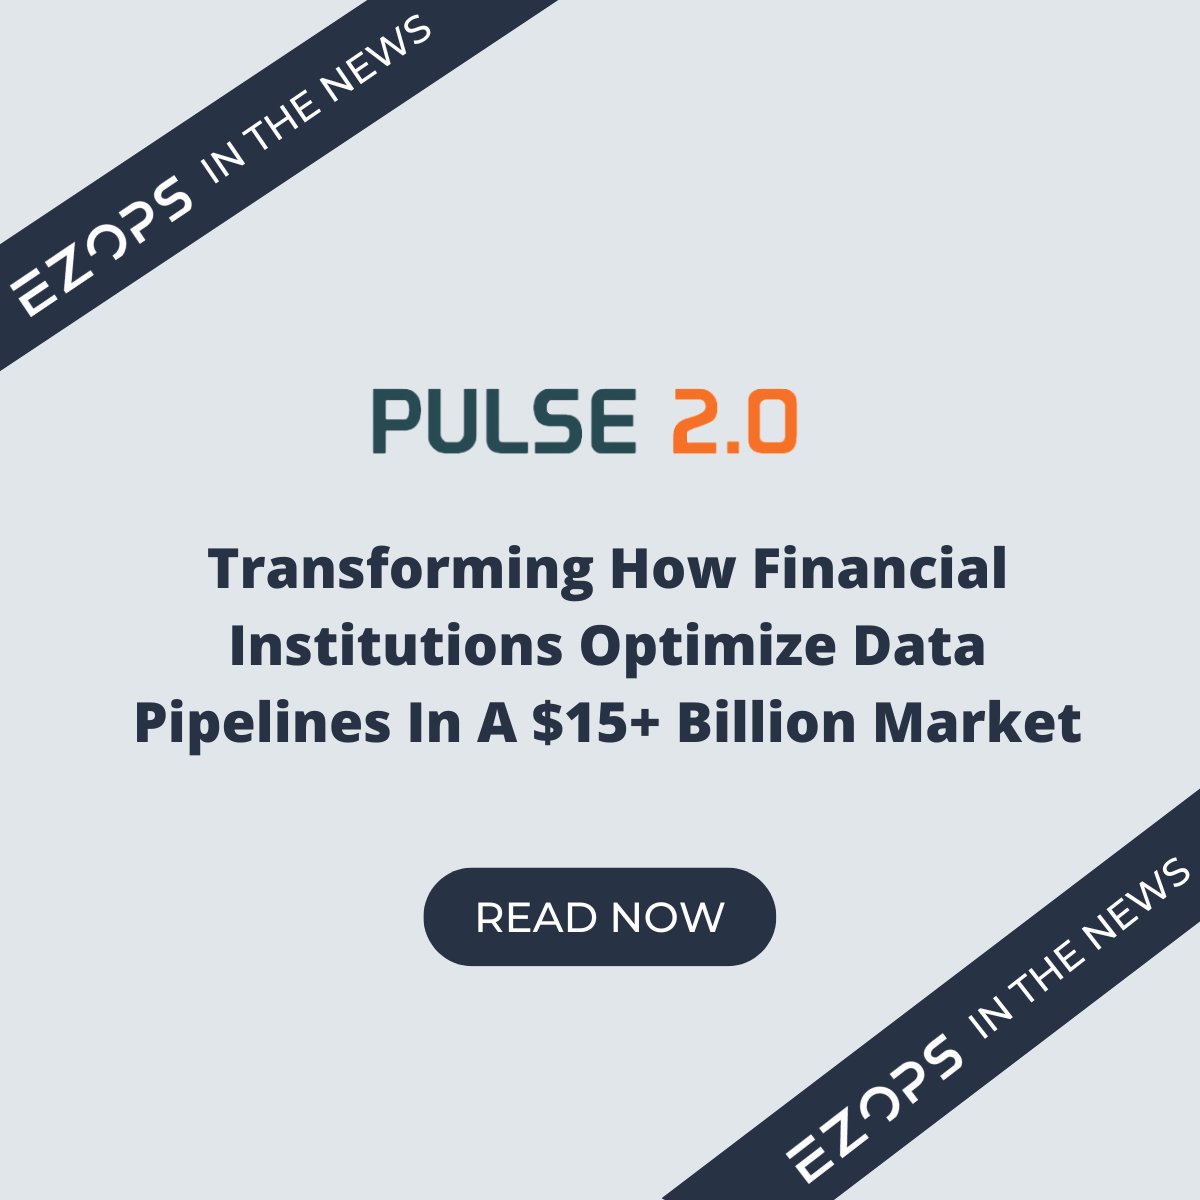 Sarva Srinivasan, EZOPS Co-founder and CEO, is featured in this Pulse 2.0 article about transforming data using ML and automation.

Read more: 
pulse2.com/ezops-sarva-sr… 

#Automation